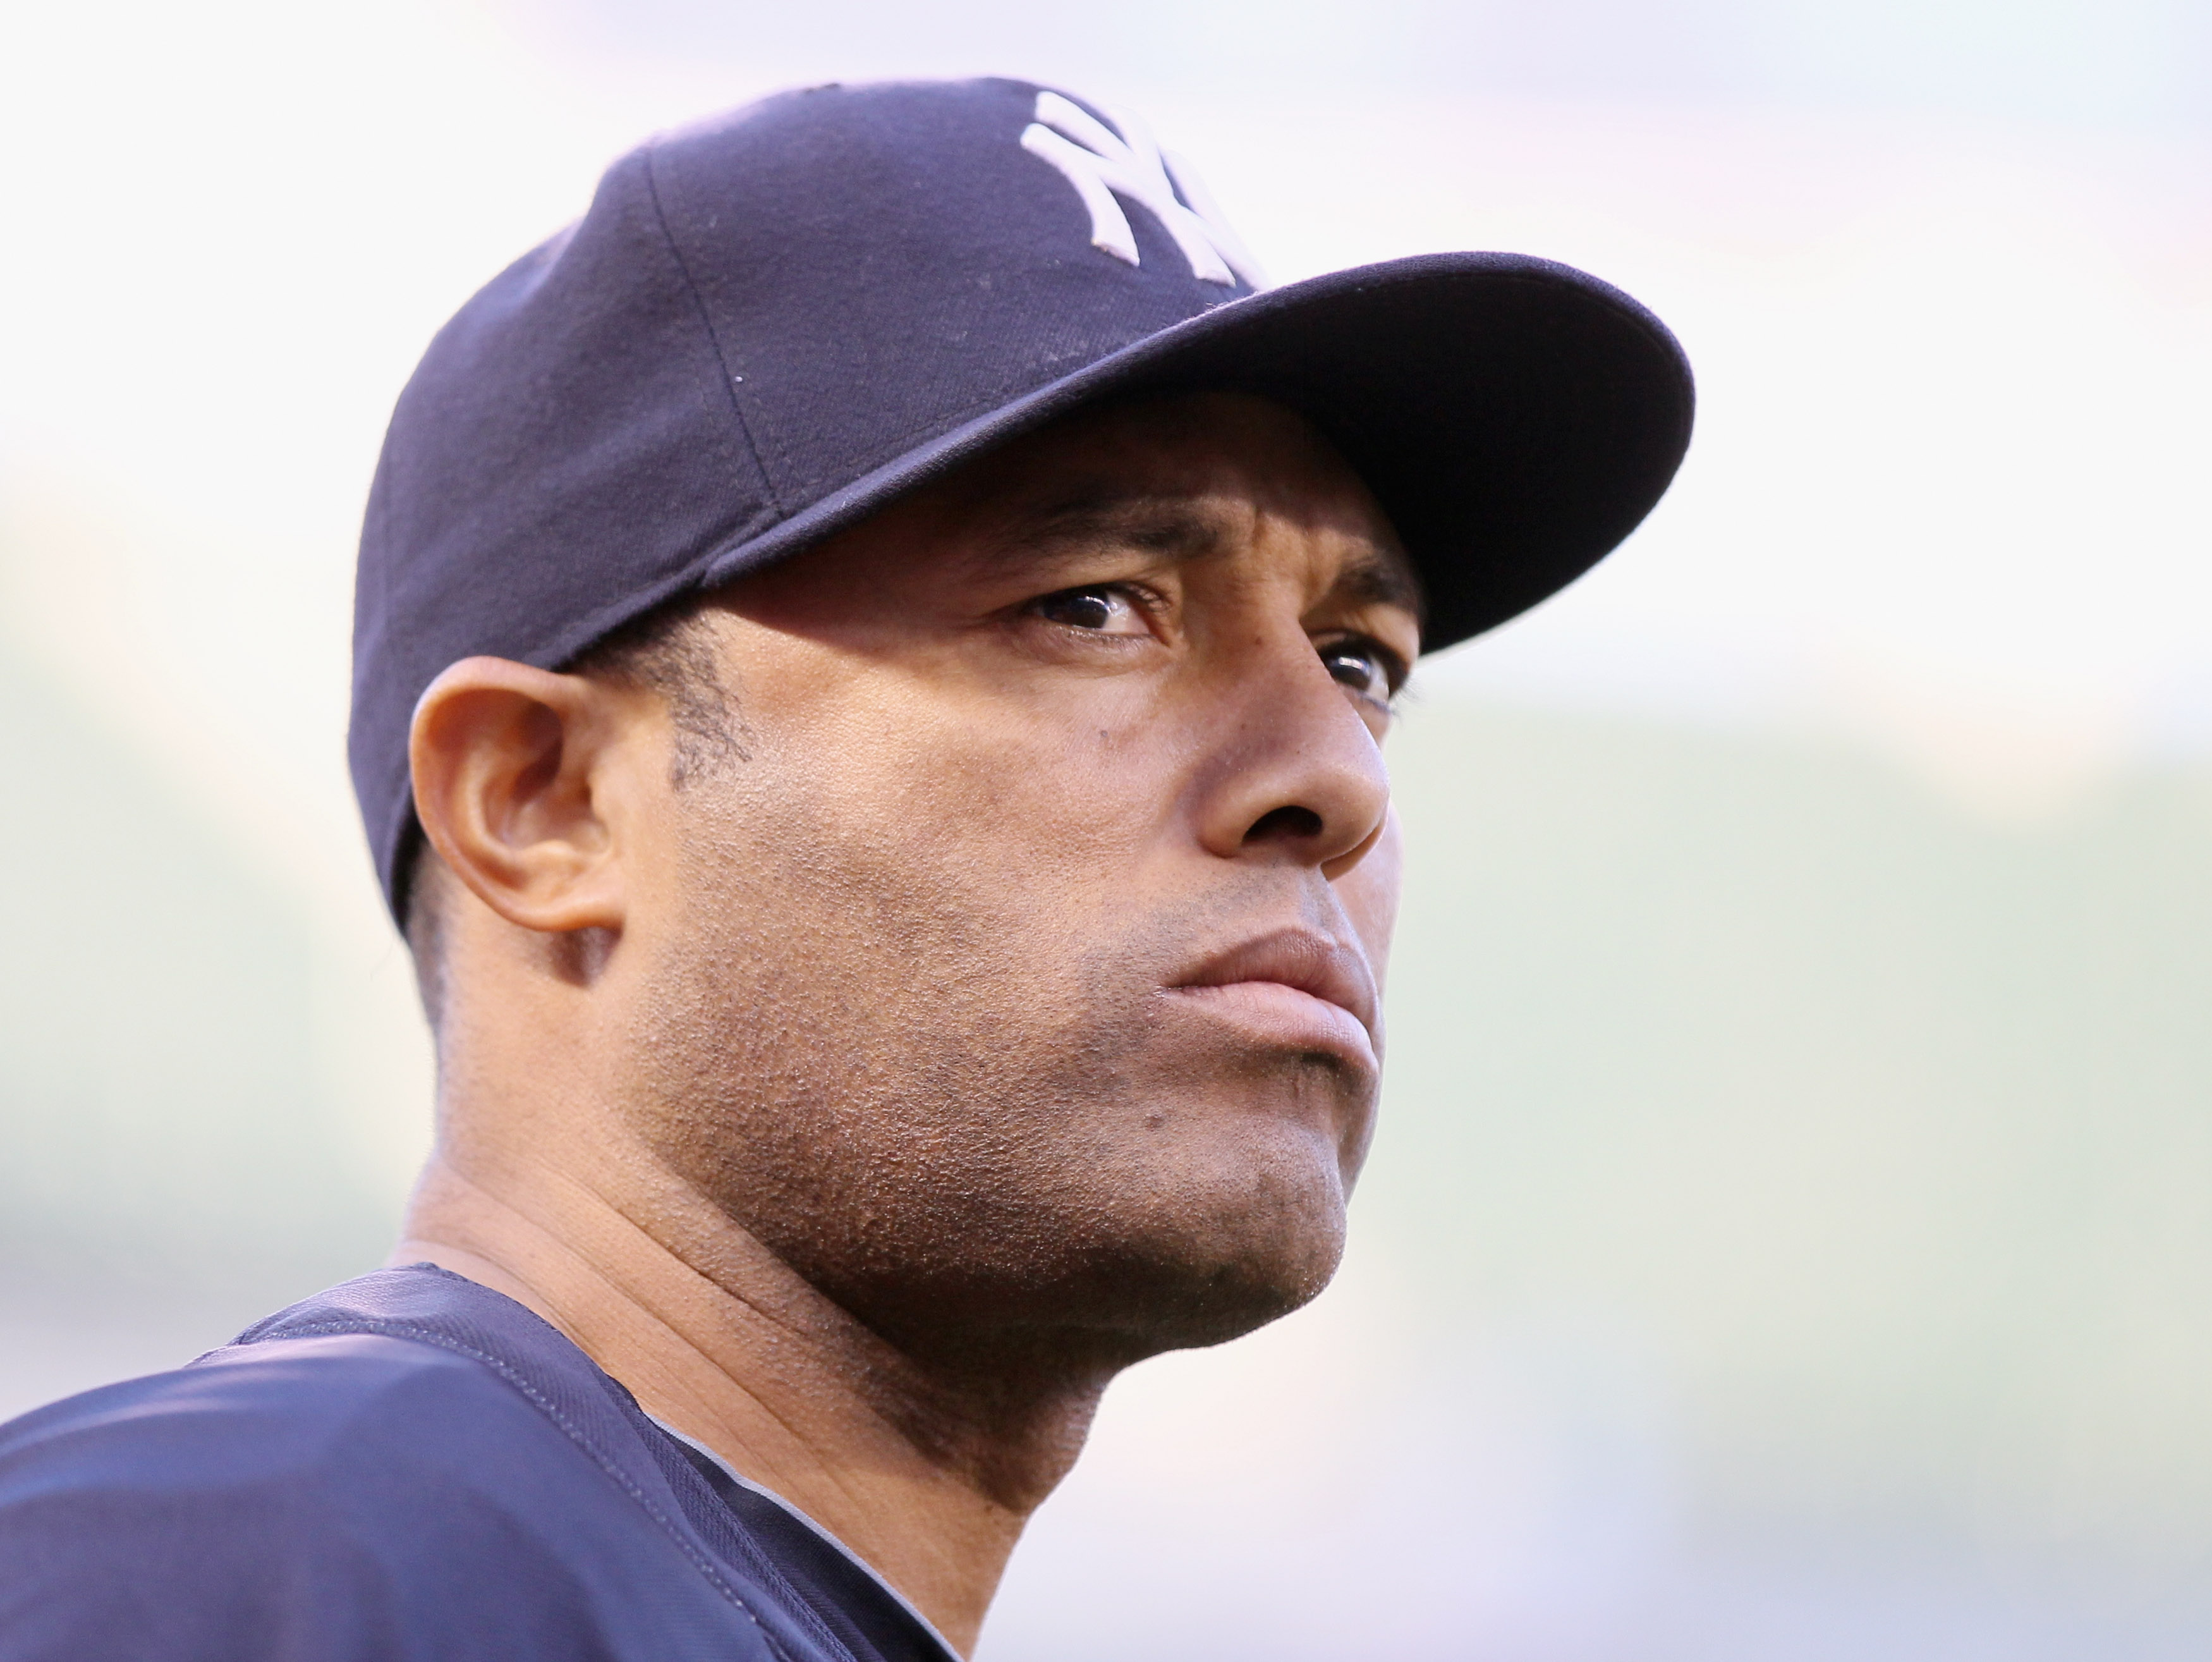 MINNEAPOLIS - OCTOBER 06:  Mariano Rivera #42 of the New York Yankees looks on during batting practice before game one of the ALDS against the Minnesota Twins on October 6, 2010 at Target Field in Minneapolis, Minnesota.  (Photo by Elsa/Getty Images)